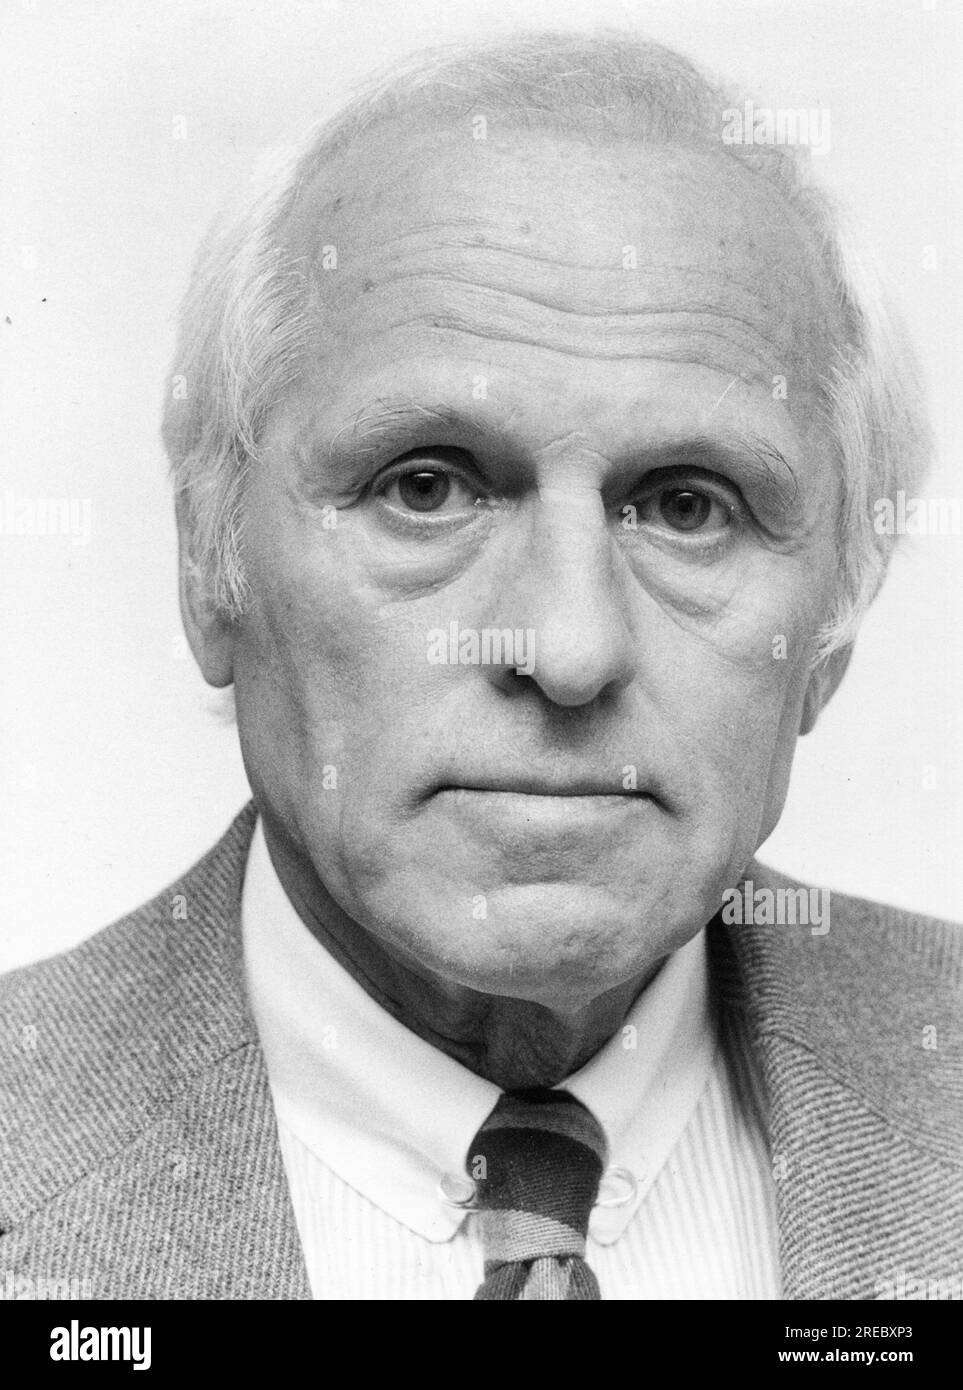 Weiss, Carl, 28.9.1925 - April 2018, German journalist, March 1984, ADDITIONAL-RIGHTS-CLEARANCE-INFO-NOT-AVAILABLE Stock Photo